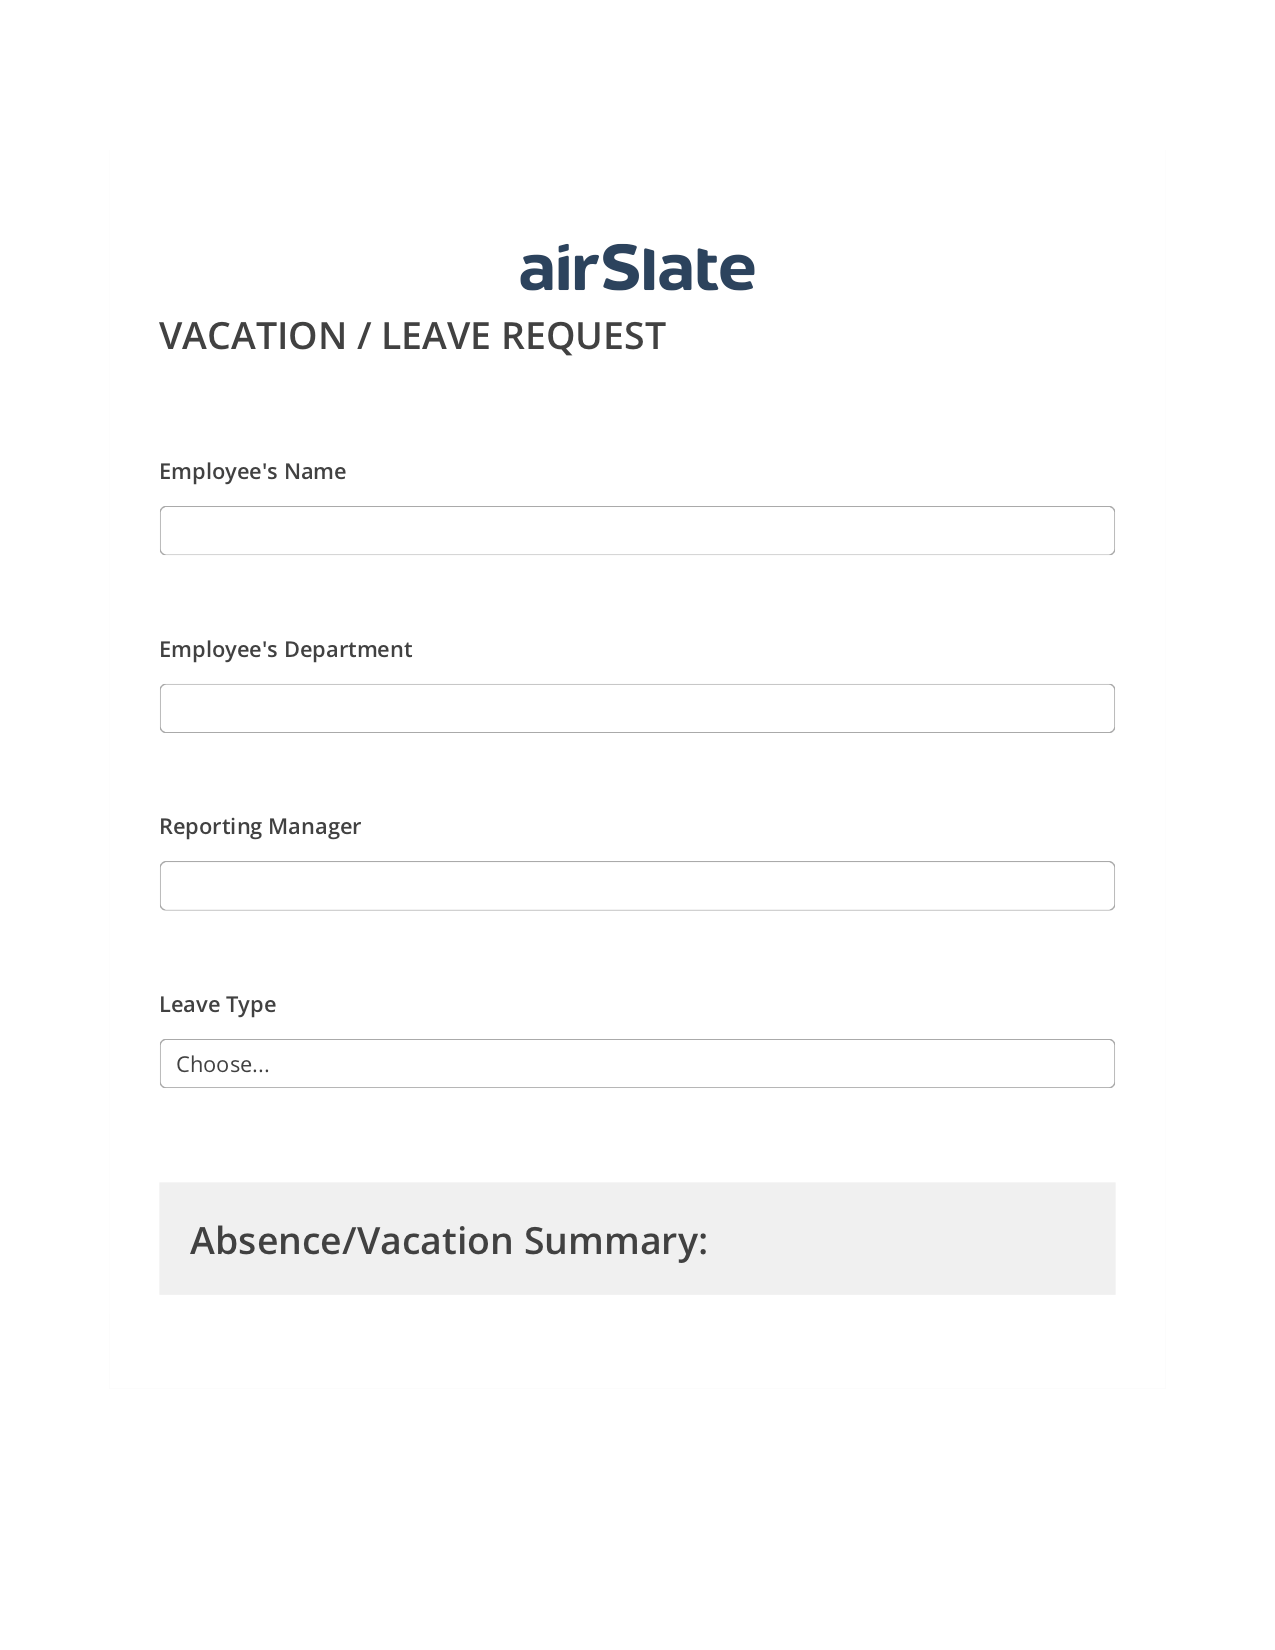 Multirole Vacation/Leave Request Workflow Pre-fill from Google Sheets Bot, Remove Slate Bot, Archive to Dropbox Bot